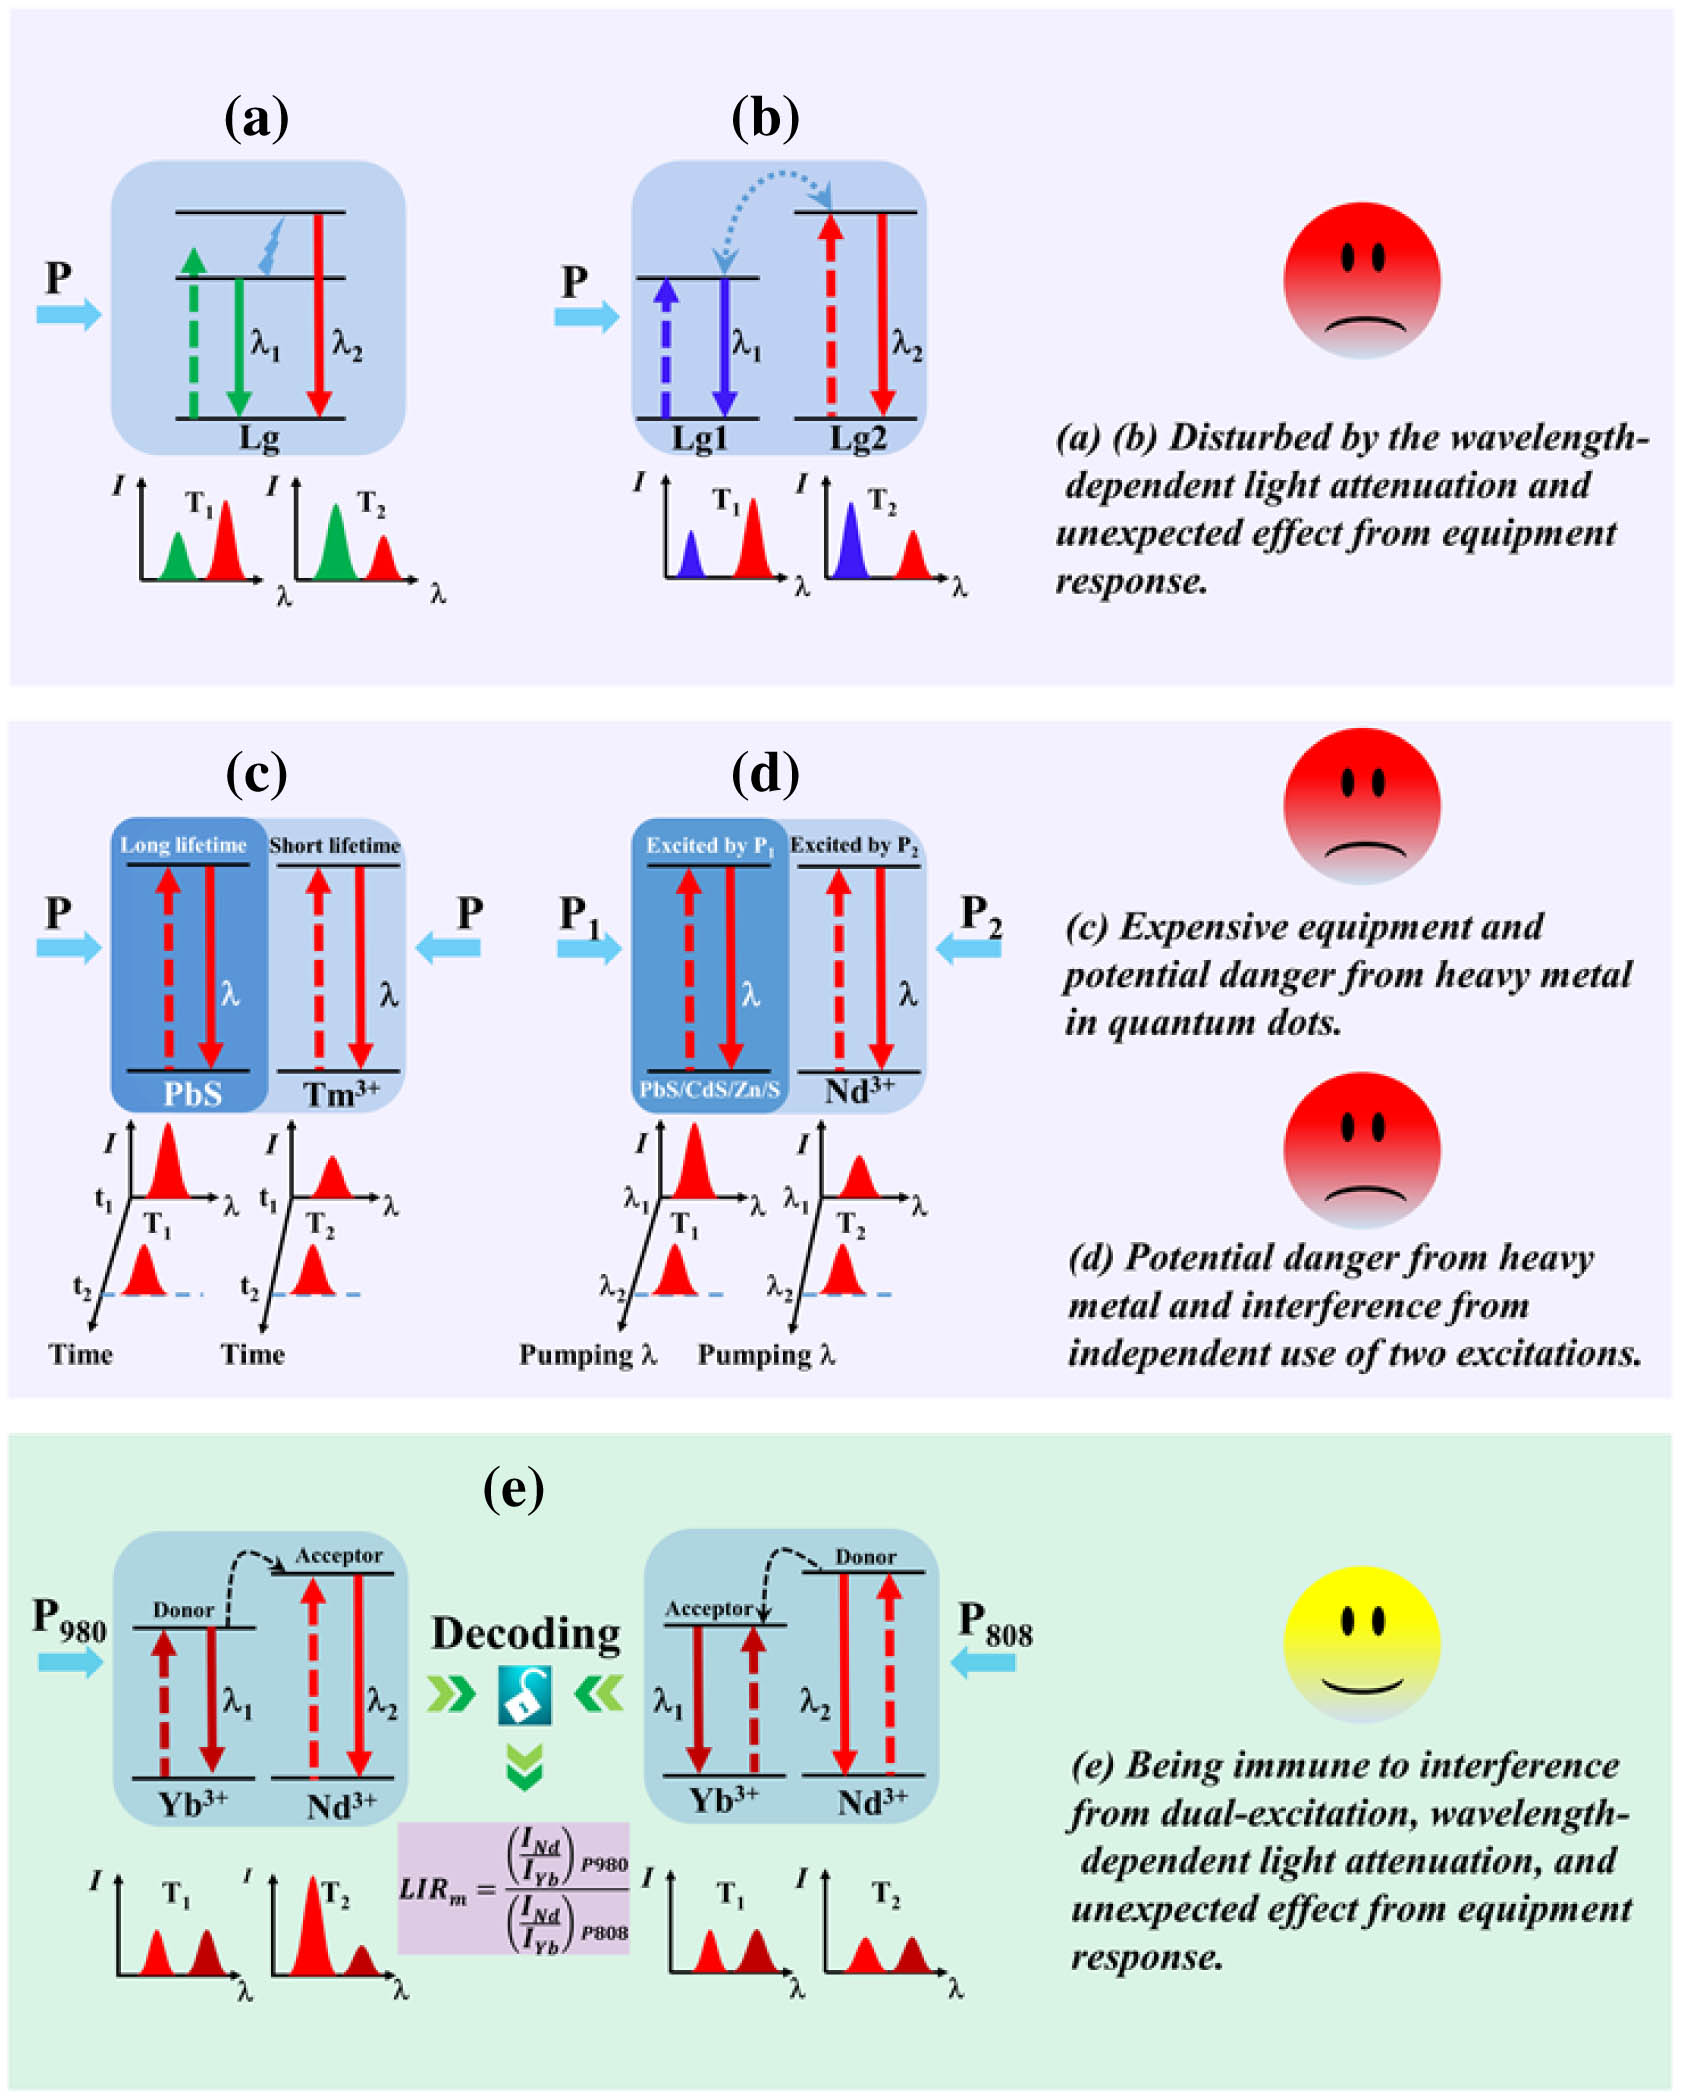 Schematic illustrations of optical temperature sensing based on emissions working in different wavelength regions from (a) thermally coupled levels and (b) two luminescent groups (Lg). Schematic illustrations of optical temperature sensing based on emissions working in identical wavelength regions from (c) two Lgs excited by a single light source and (d) two Lgs excited by two light sources. (e) Dual-excitation decoding multiparameter-based ratiometric thermometry strategy proposed in this work.